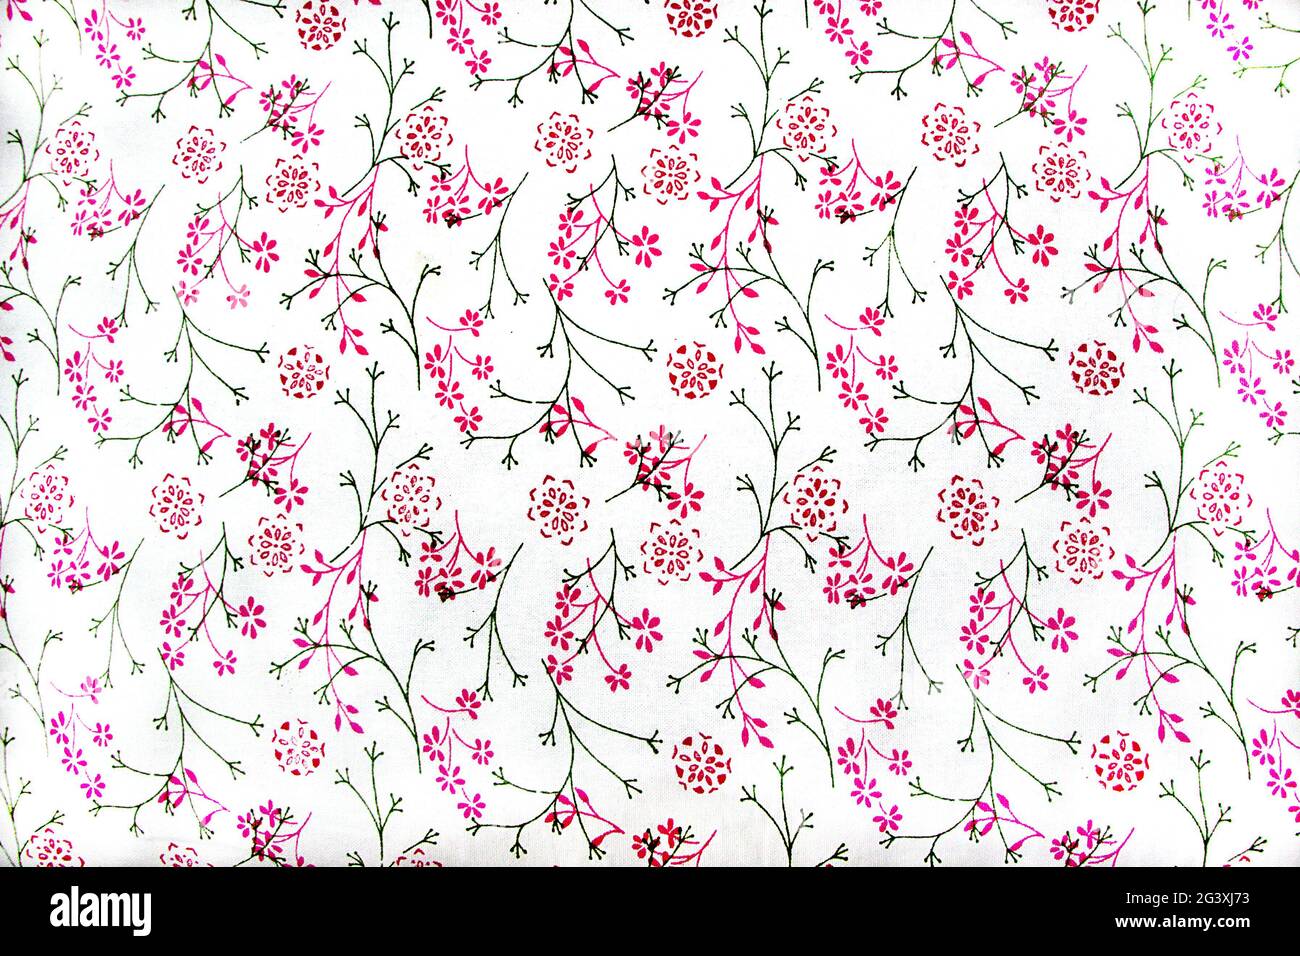 Floral Motif on White Fabric Stock Photo